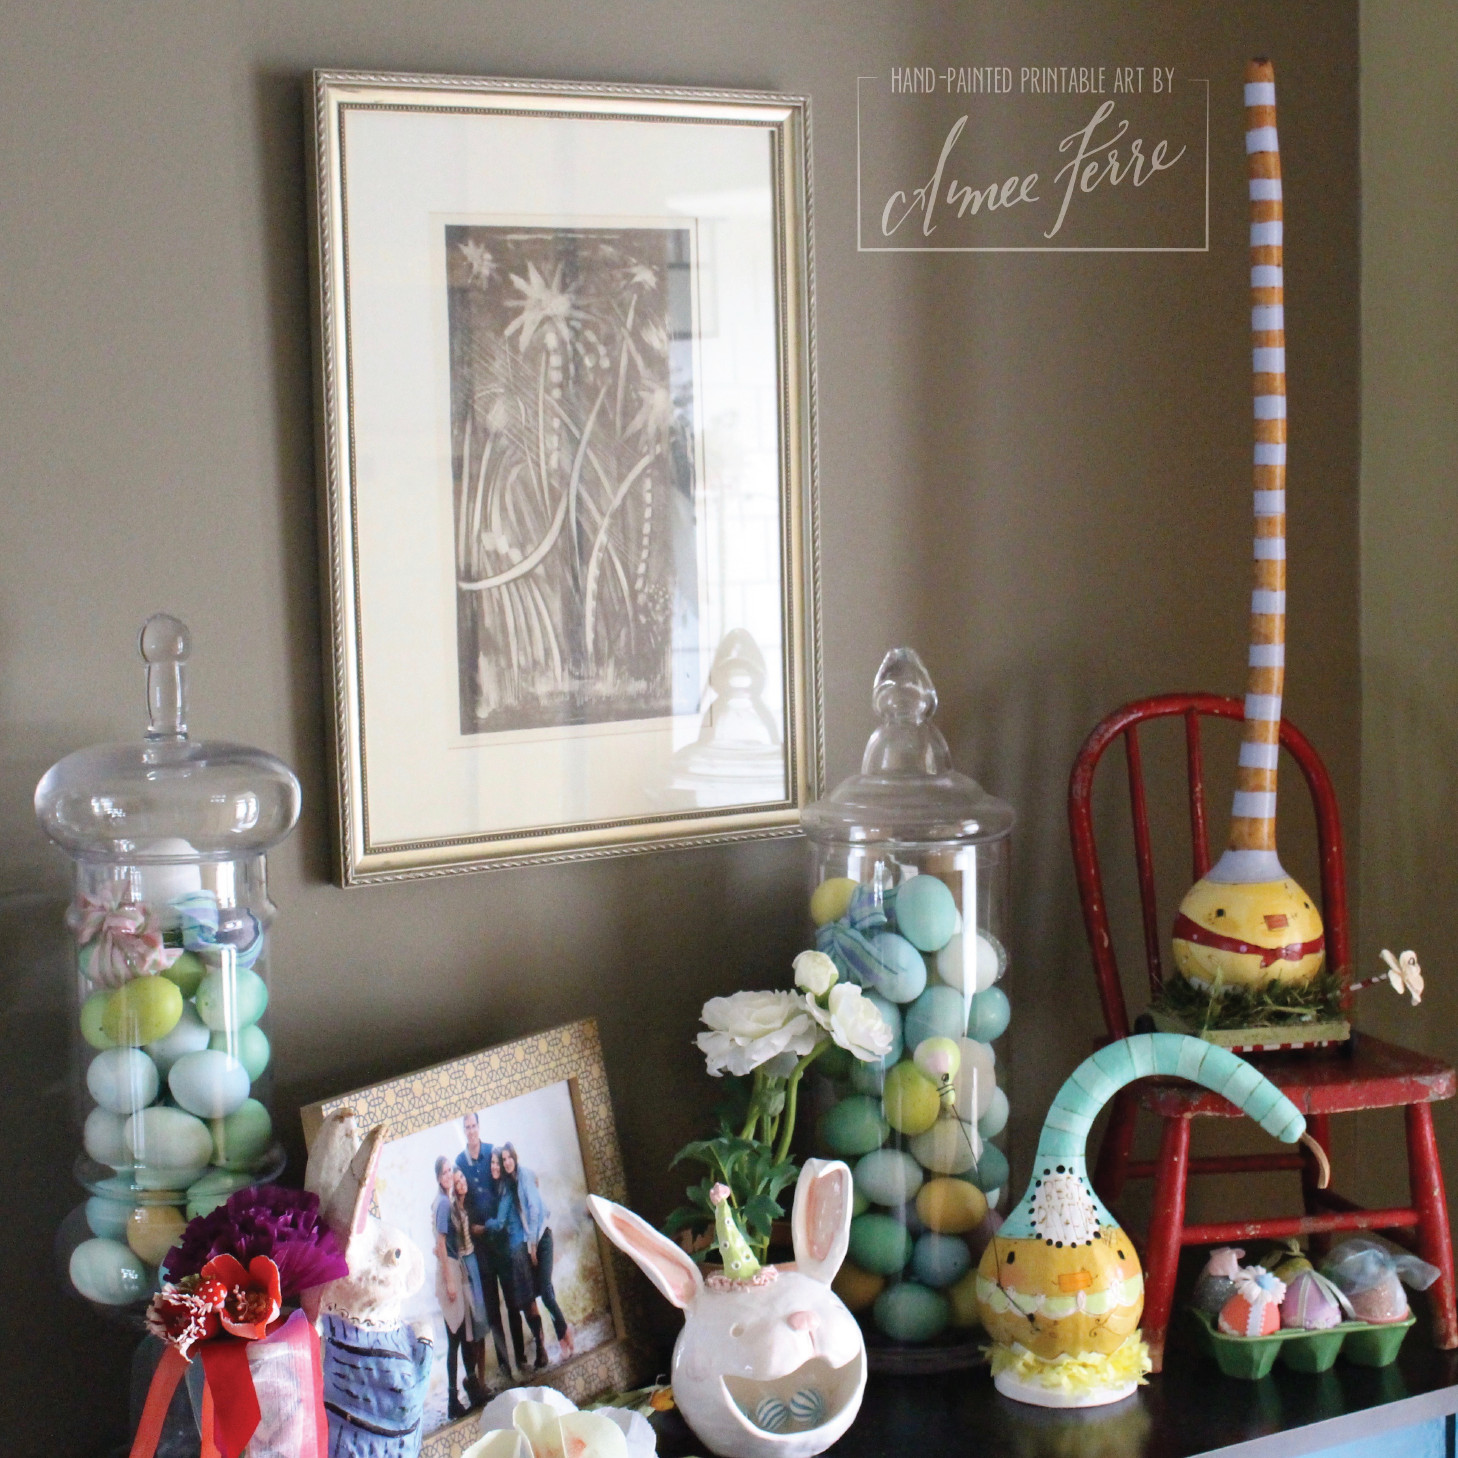 Easter Home Decor
 Easter Home Decor 2017 The Entry Table Aimee Ferre